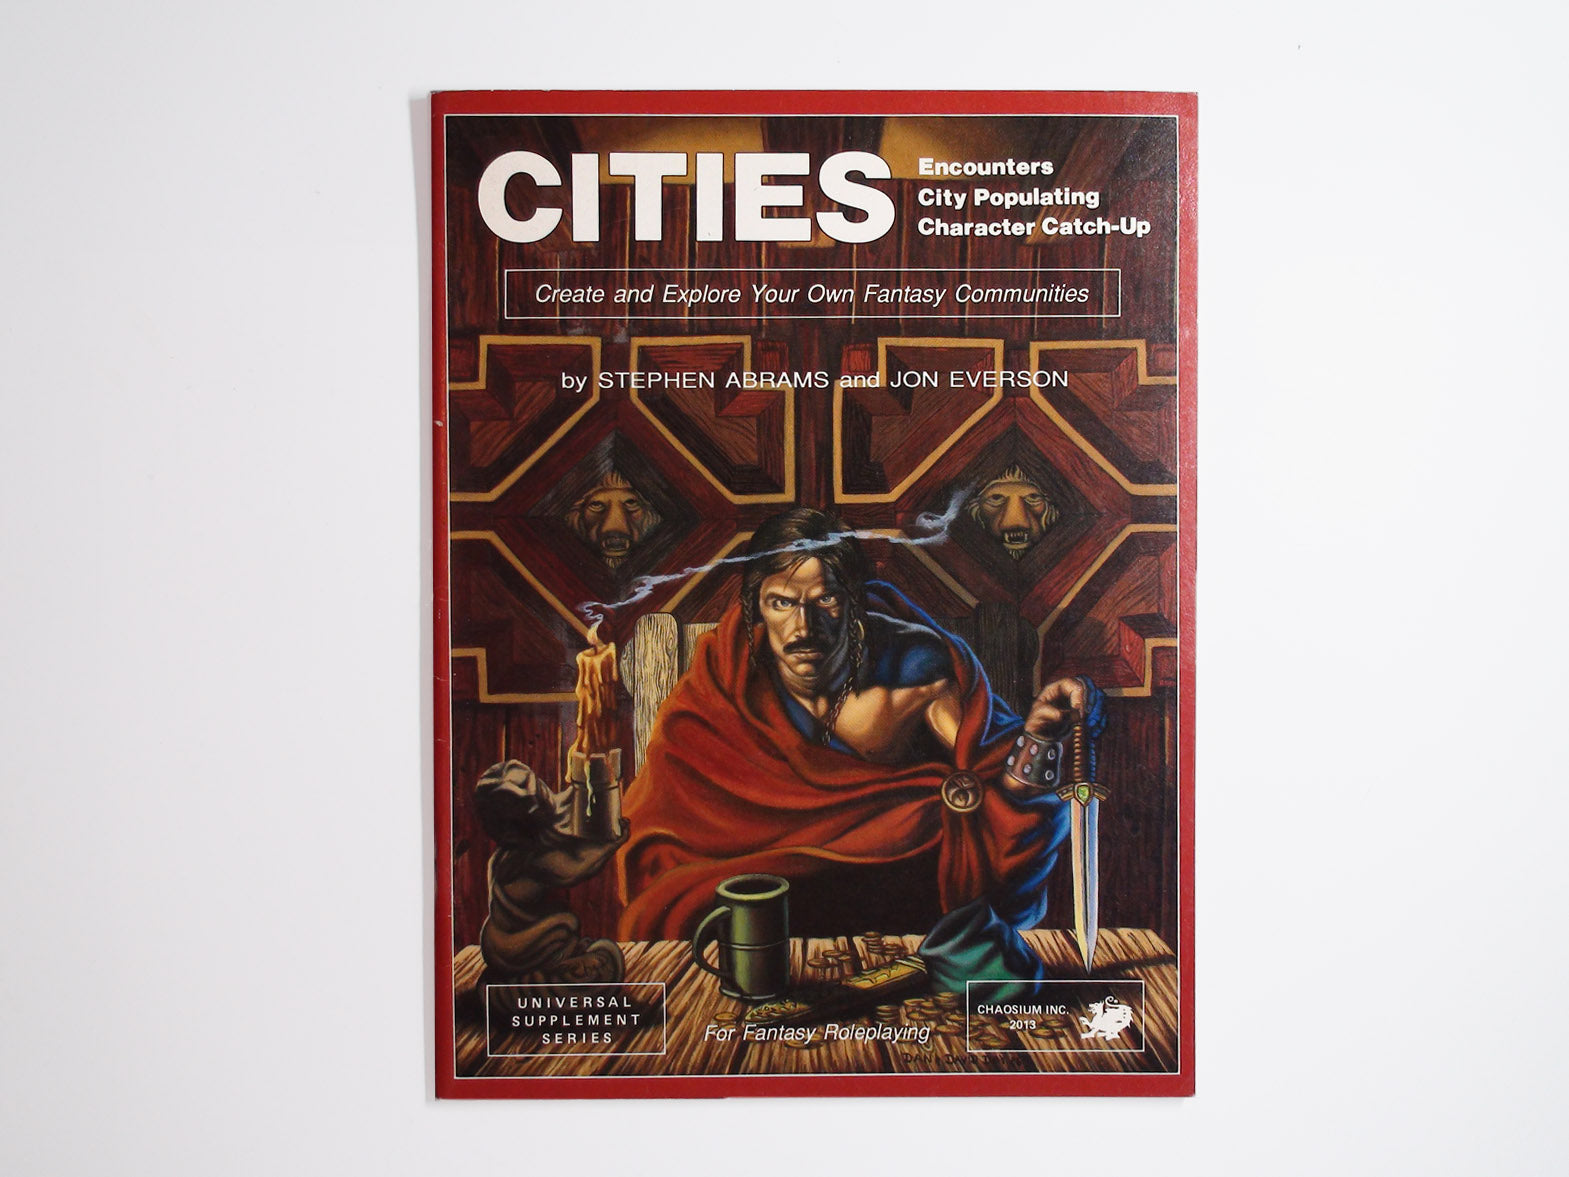 Cities, Encounters, City Populating, Character Catch-Up, Chaosium Inc, 2013